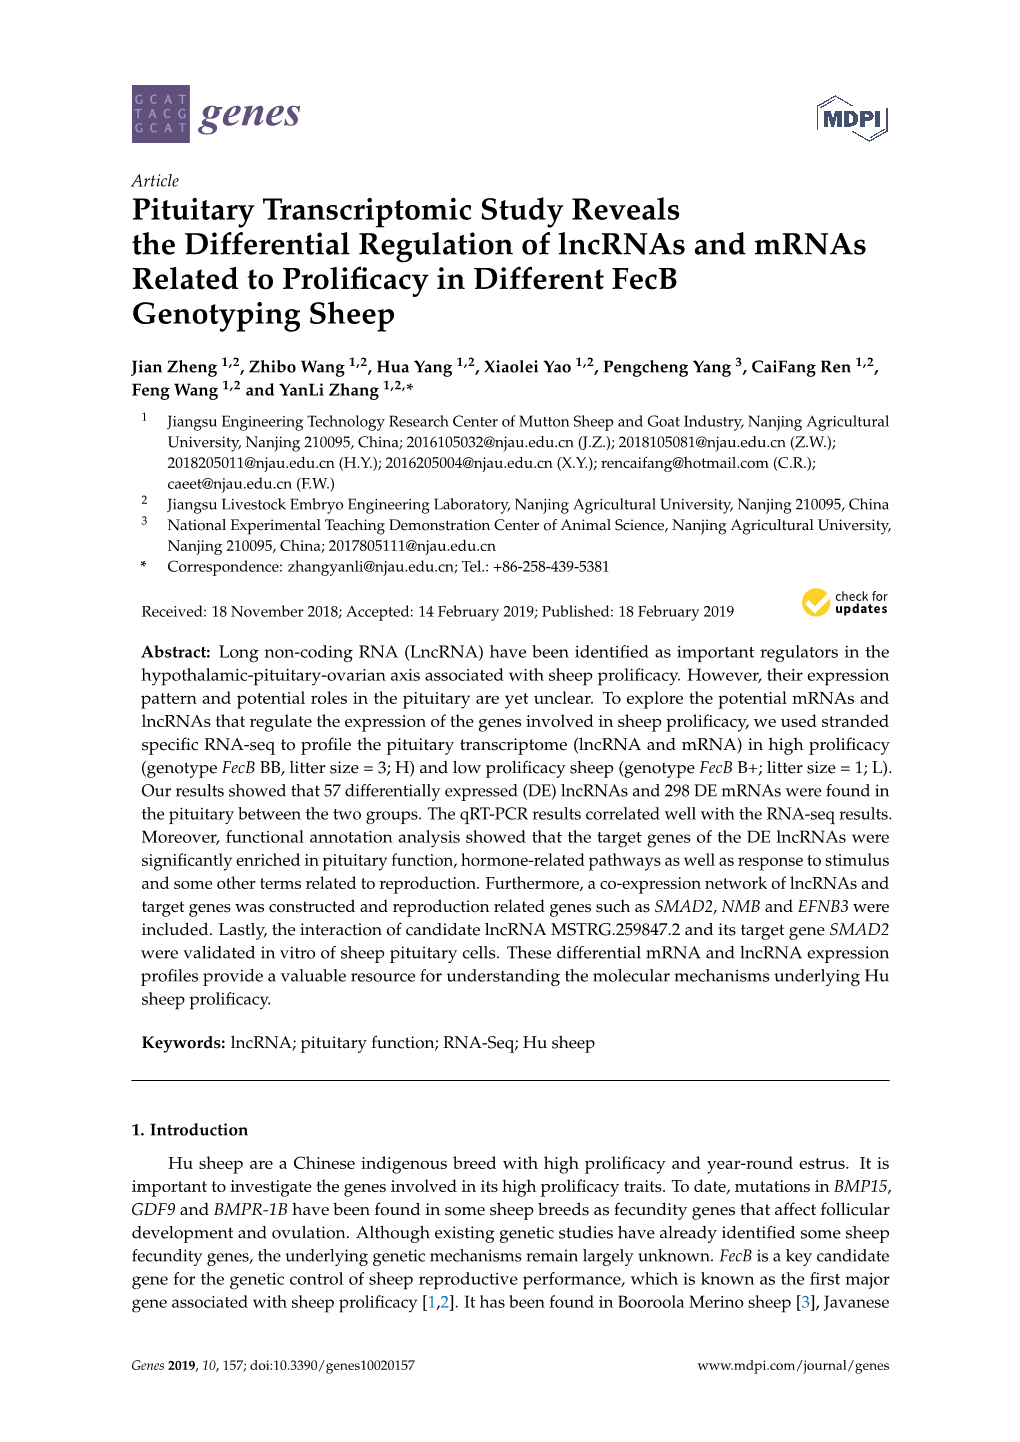 Pituitary Transcriptomic Study Reveals the Differential Regulation of Lncrnas and Mrnas Related to Proliﬁcacy in Different Fecb Genotyping Sheep